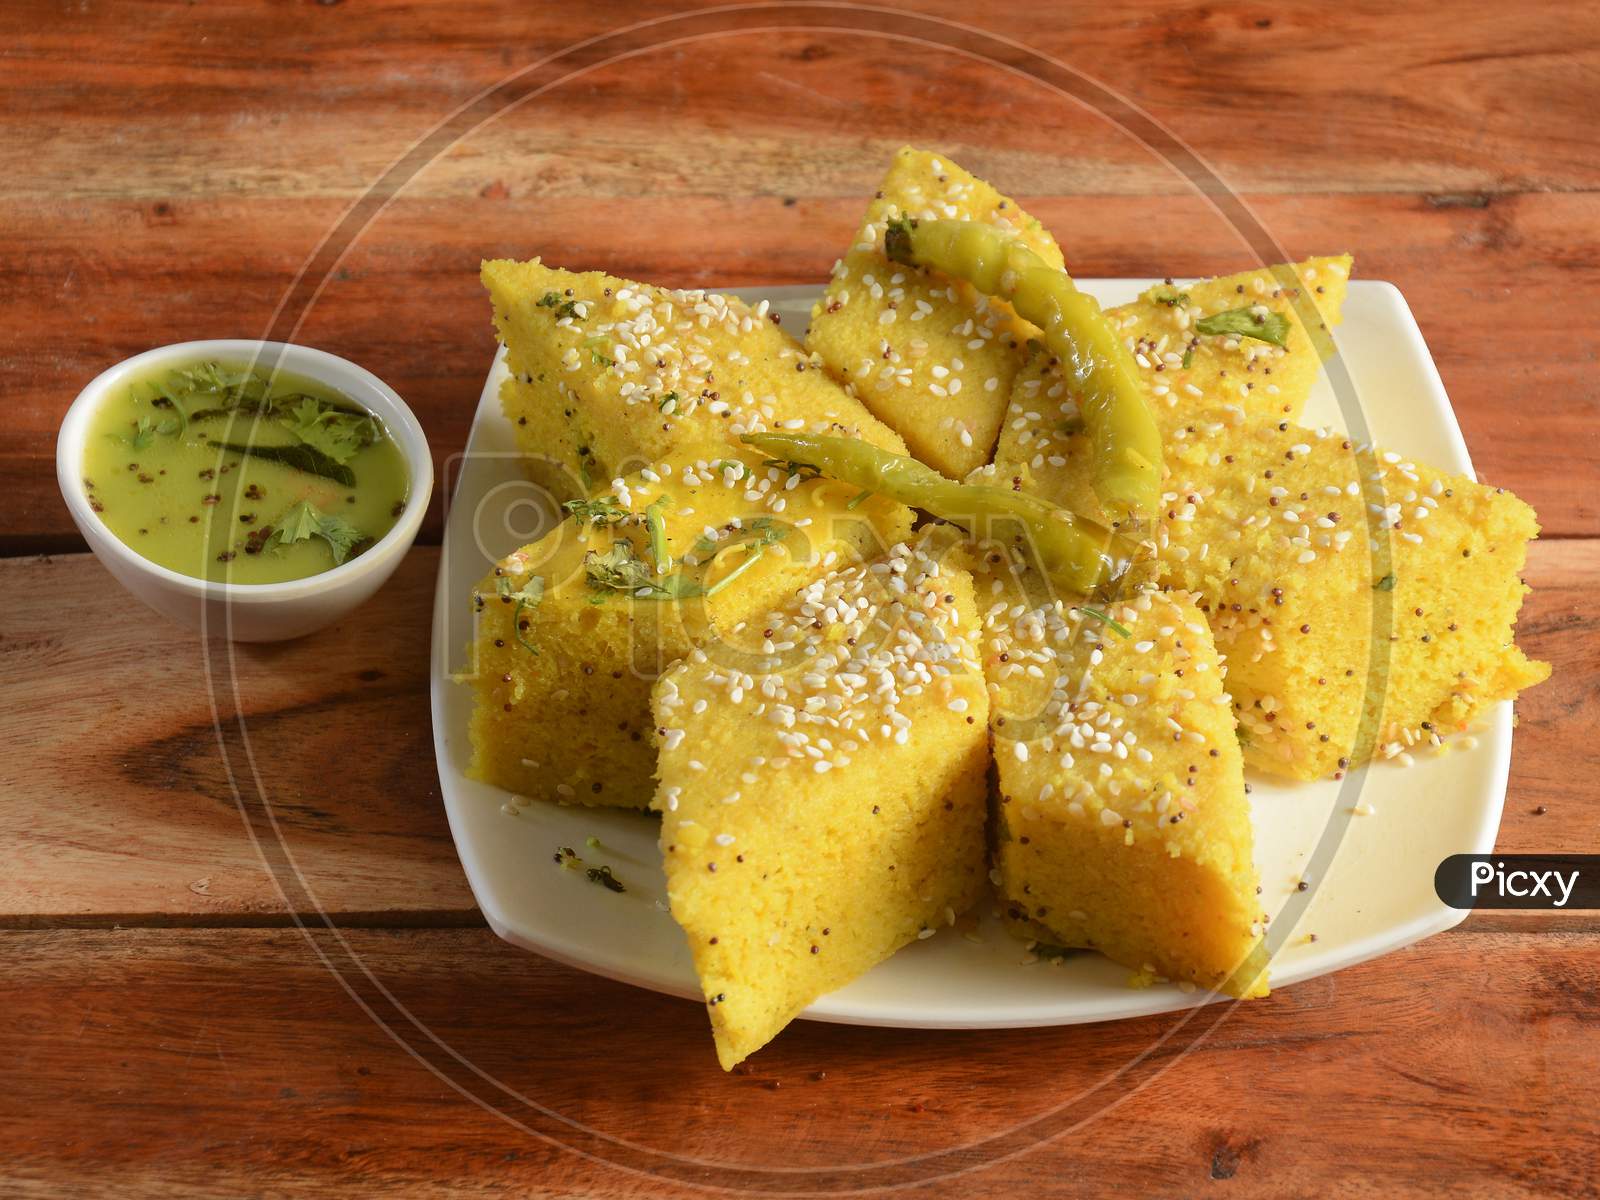 Khaman Dhokla Made Up Of Rice Or Urad Dal Is A Popular Breakfast Or Snacks Recipe From Gujarat, India, Served With Green Chutney And Fried Chilli.. Selective Focus